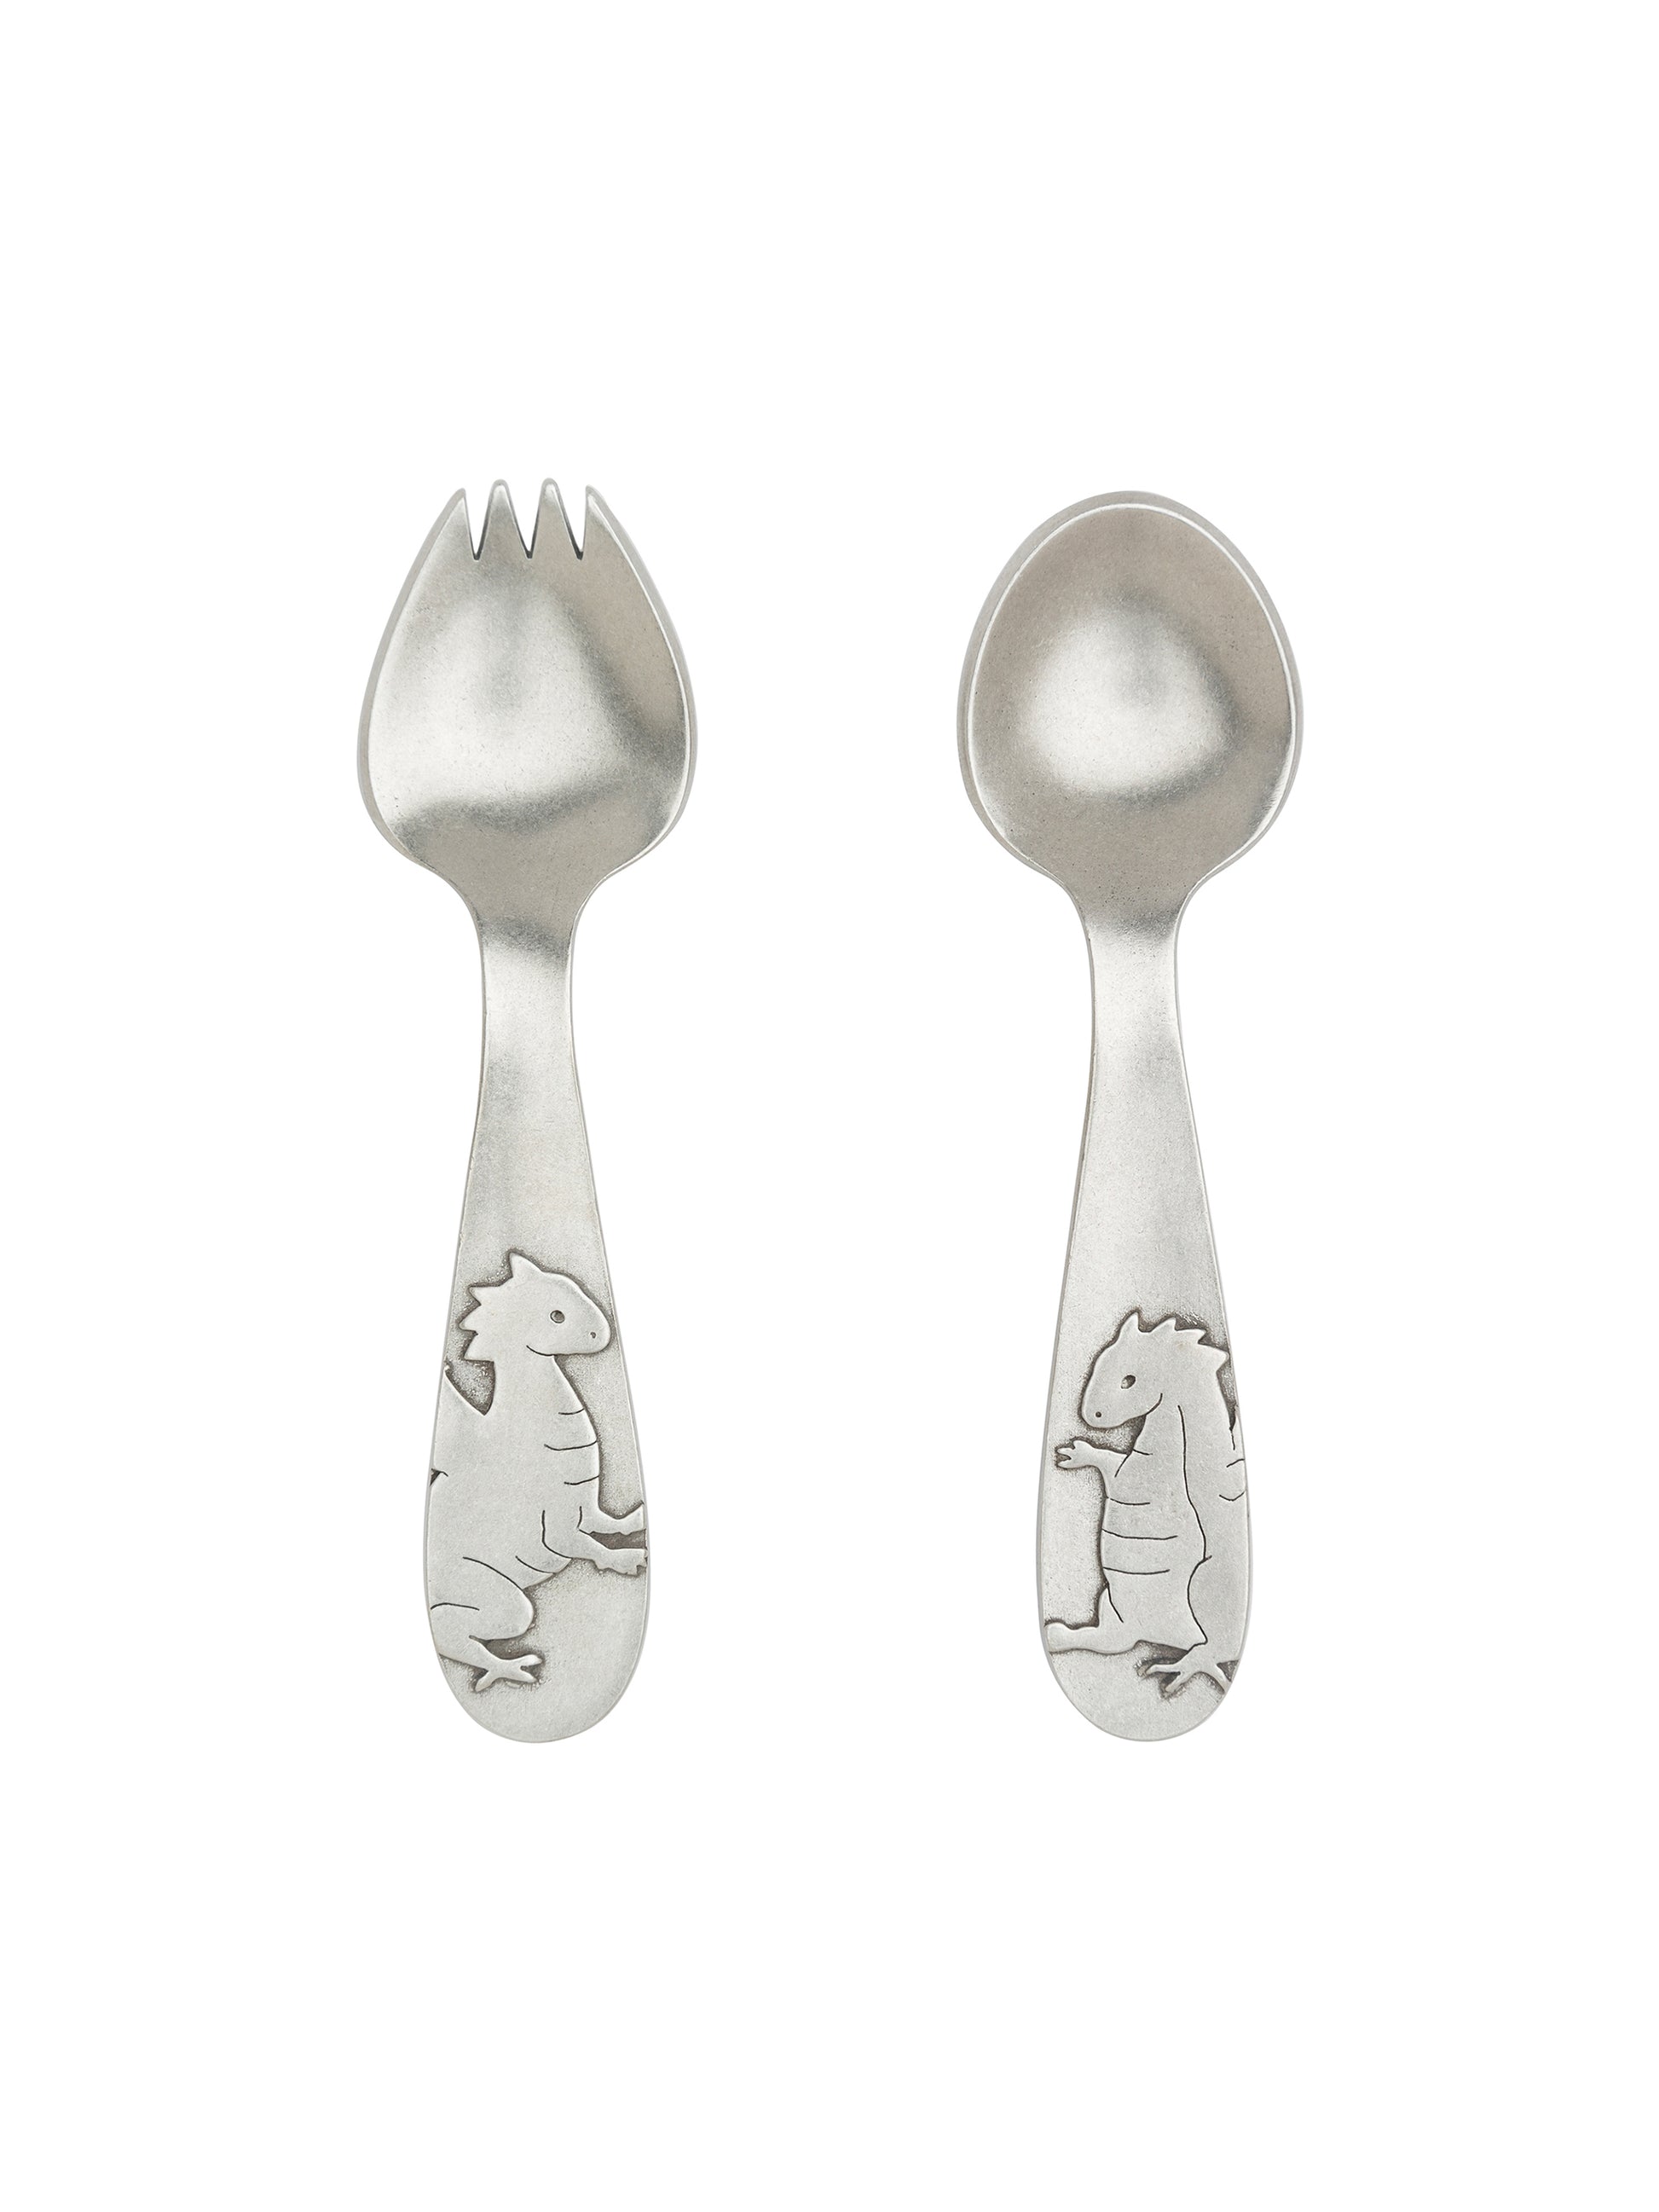 Pair of pewter baby spoons from Metal Morphosis Day Dream Free Ship!